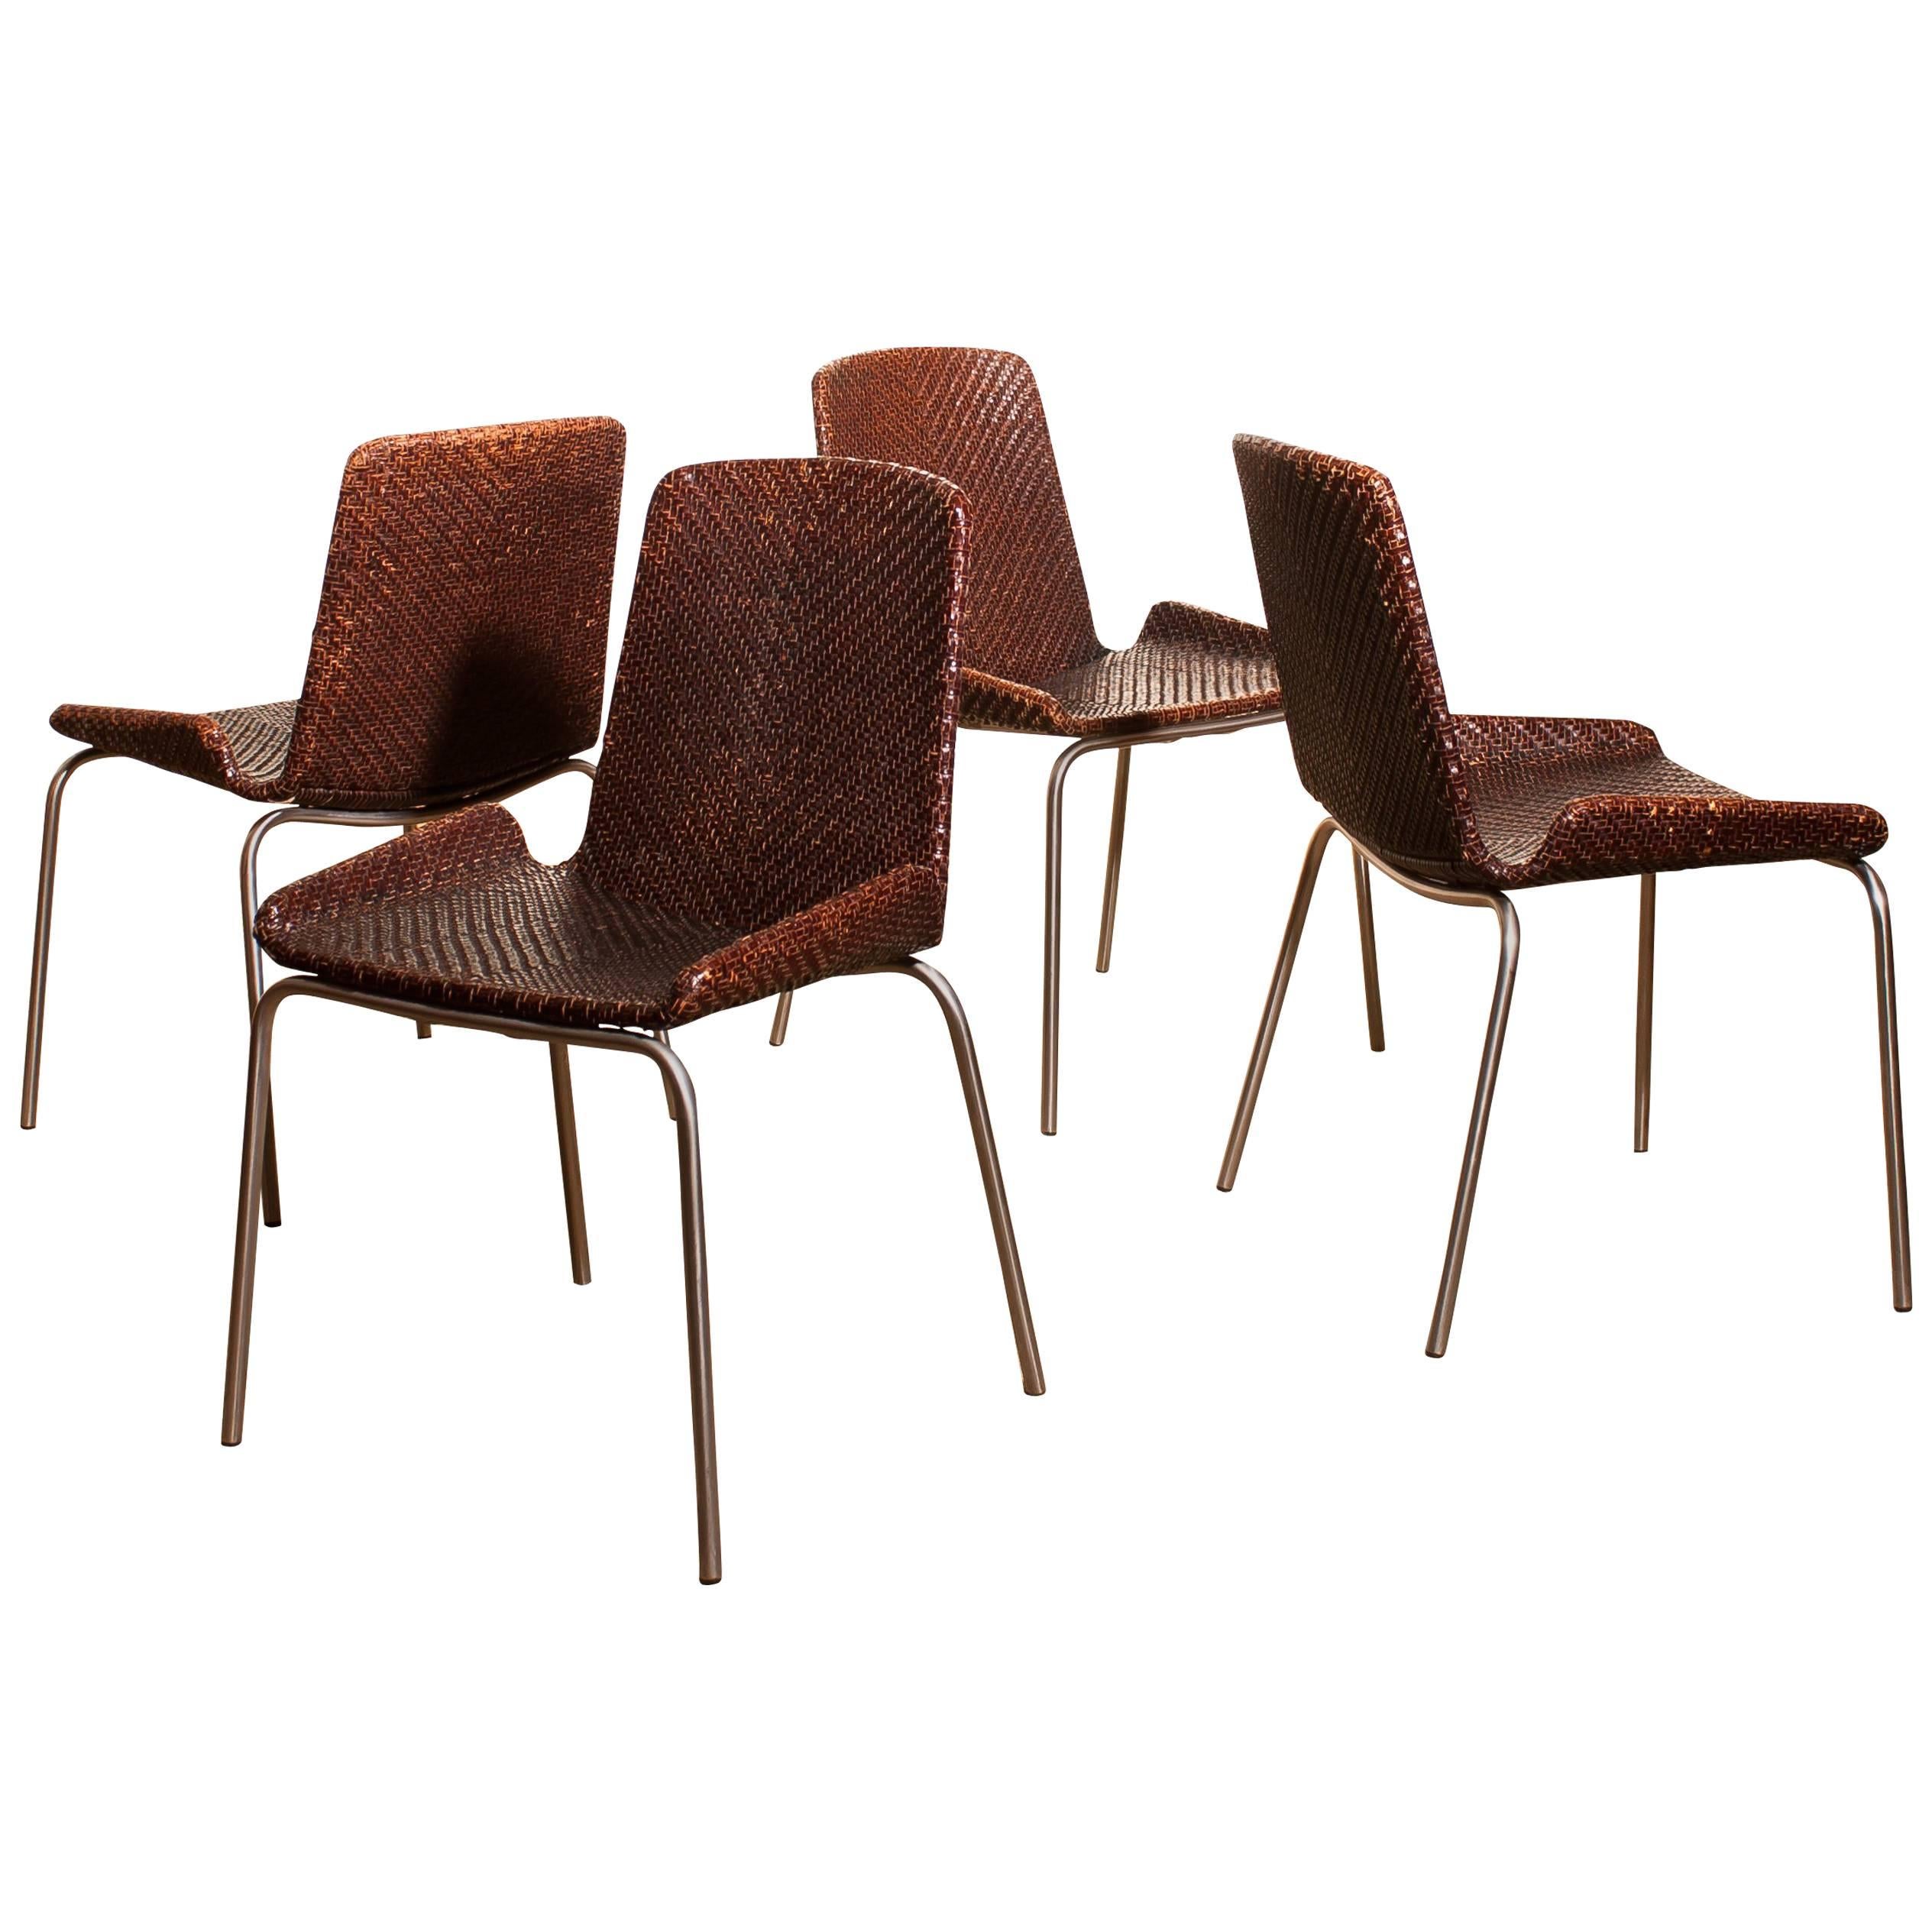 1960s, a Set of Four Leather Braided Dining Chairs, Italy